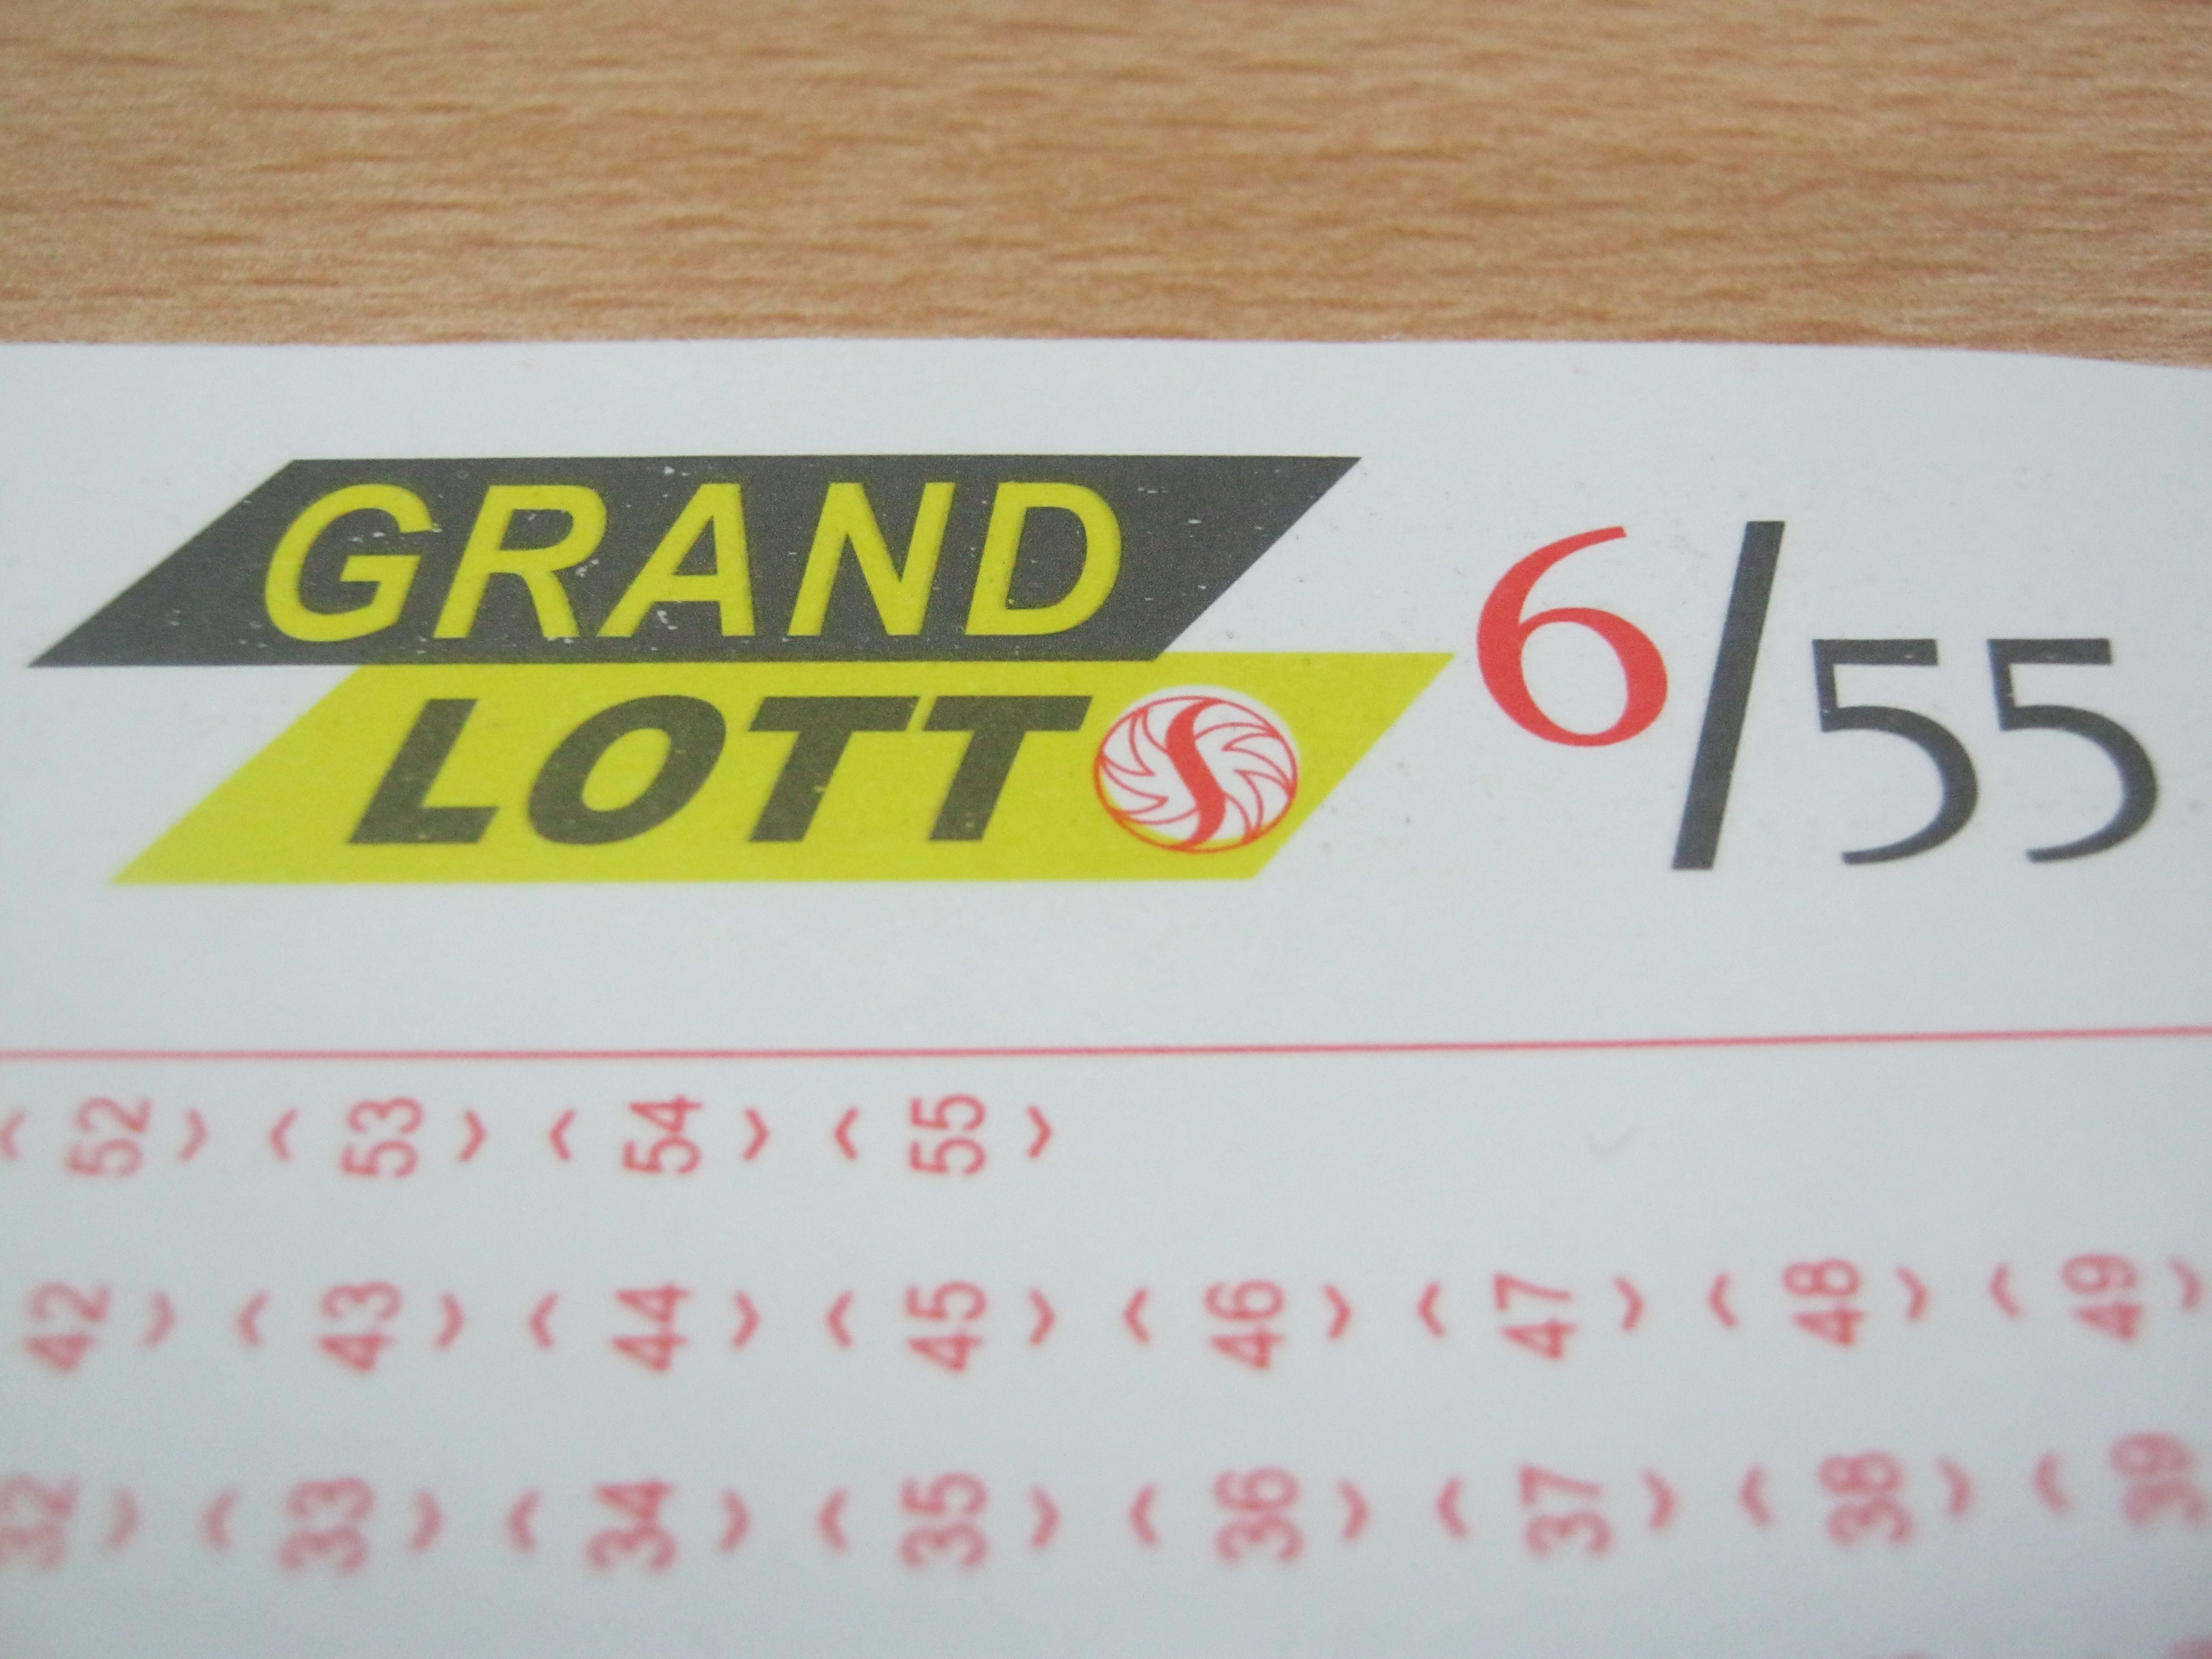 lotto result april 15, 2024 philippines today